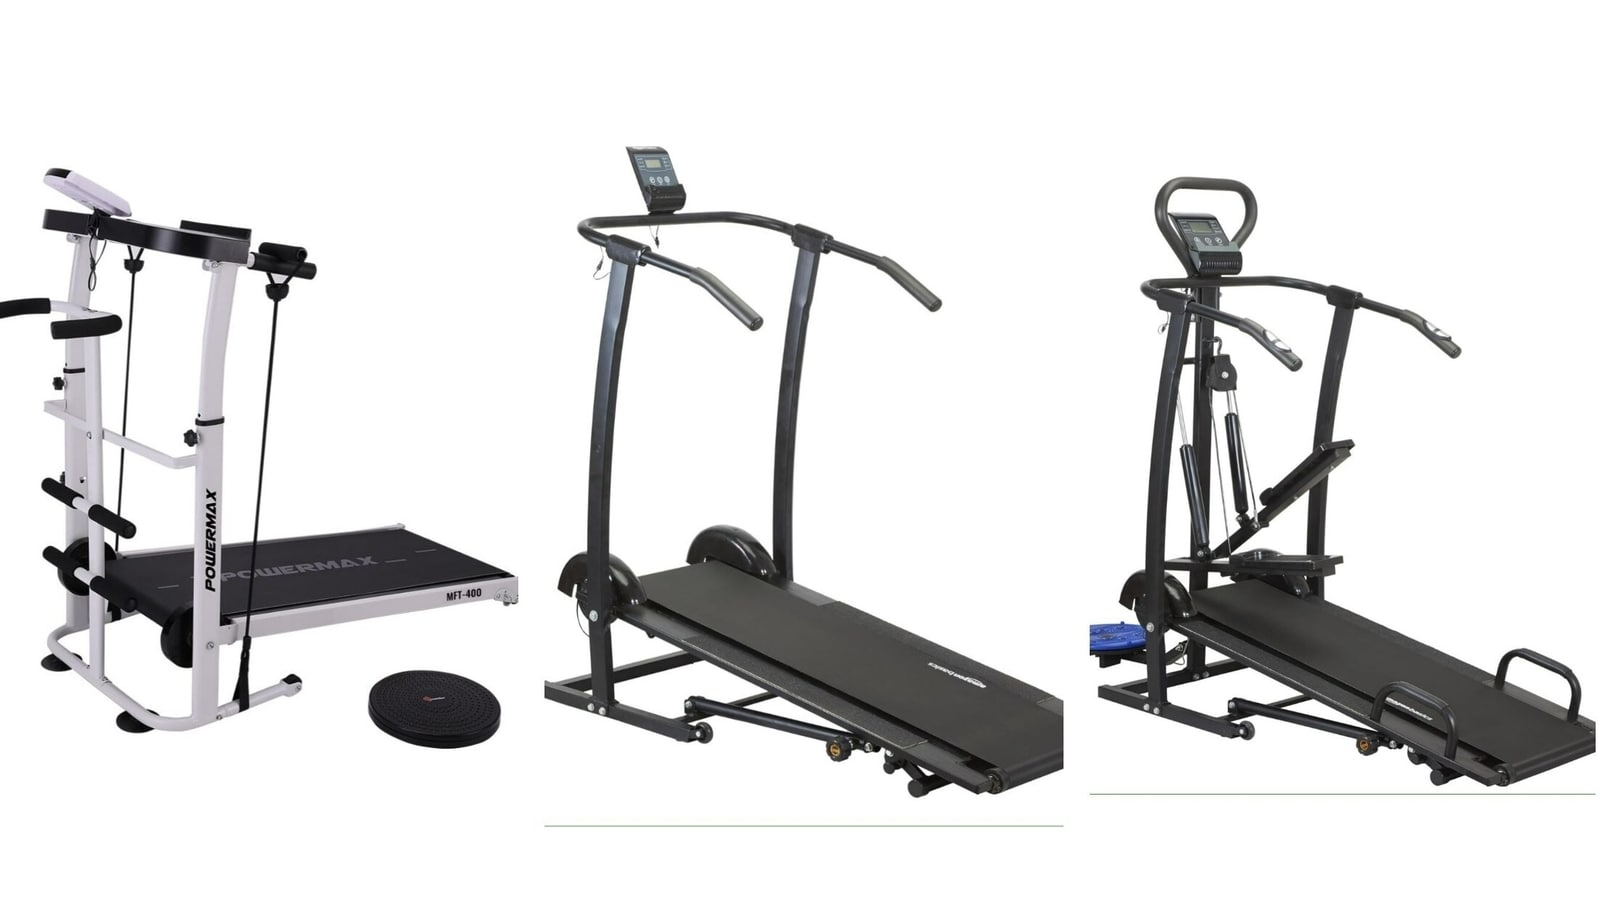 Best manual treadmills offer cost-effective ways to exercise at home and get the desired results, top 6 picks